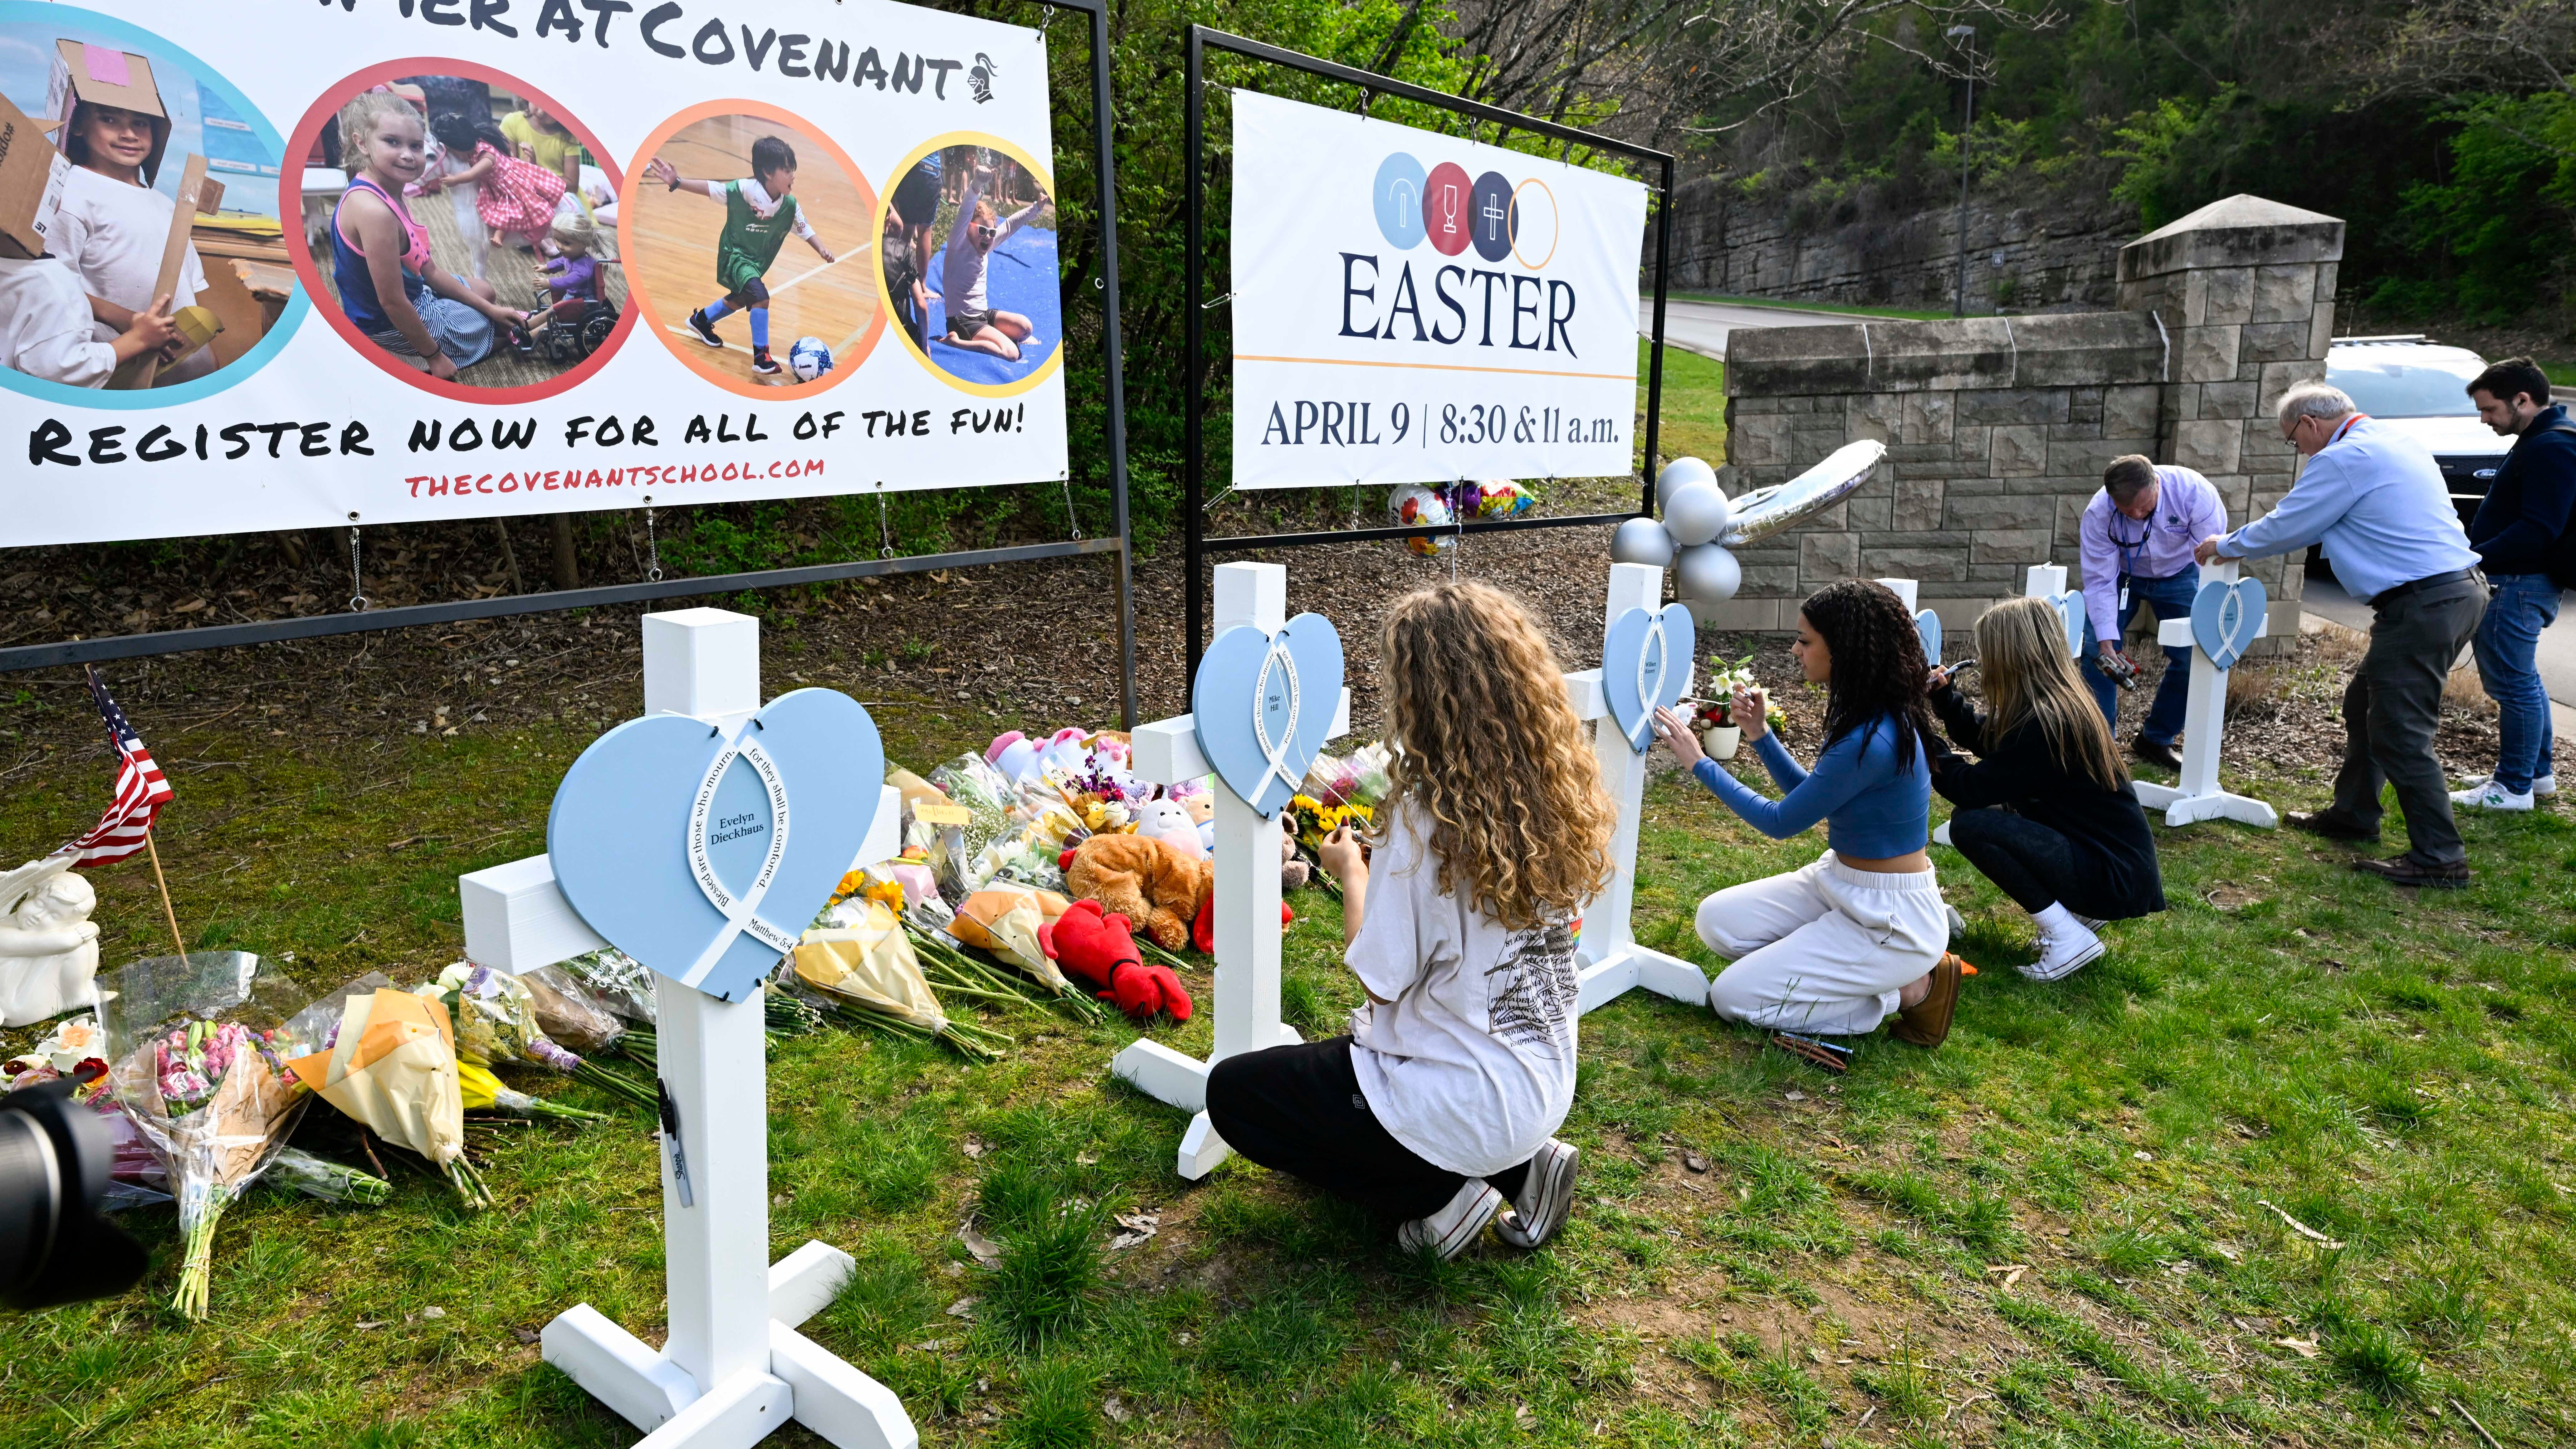 People are pictured writing messages on crosses at an entry to Covenant School in Nashville, Tennessee, which has become a memorial for the victims of Monday's school shooting.